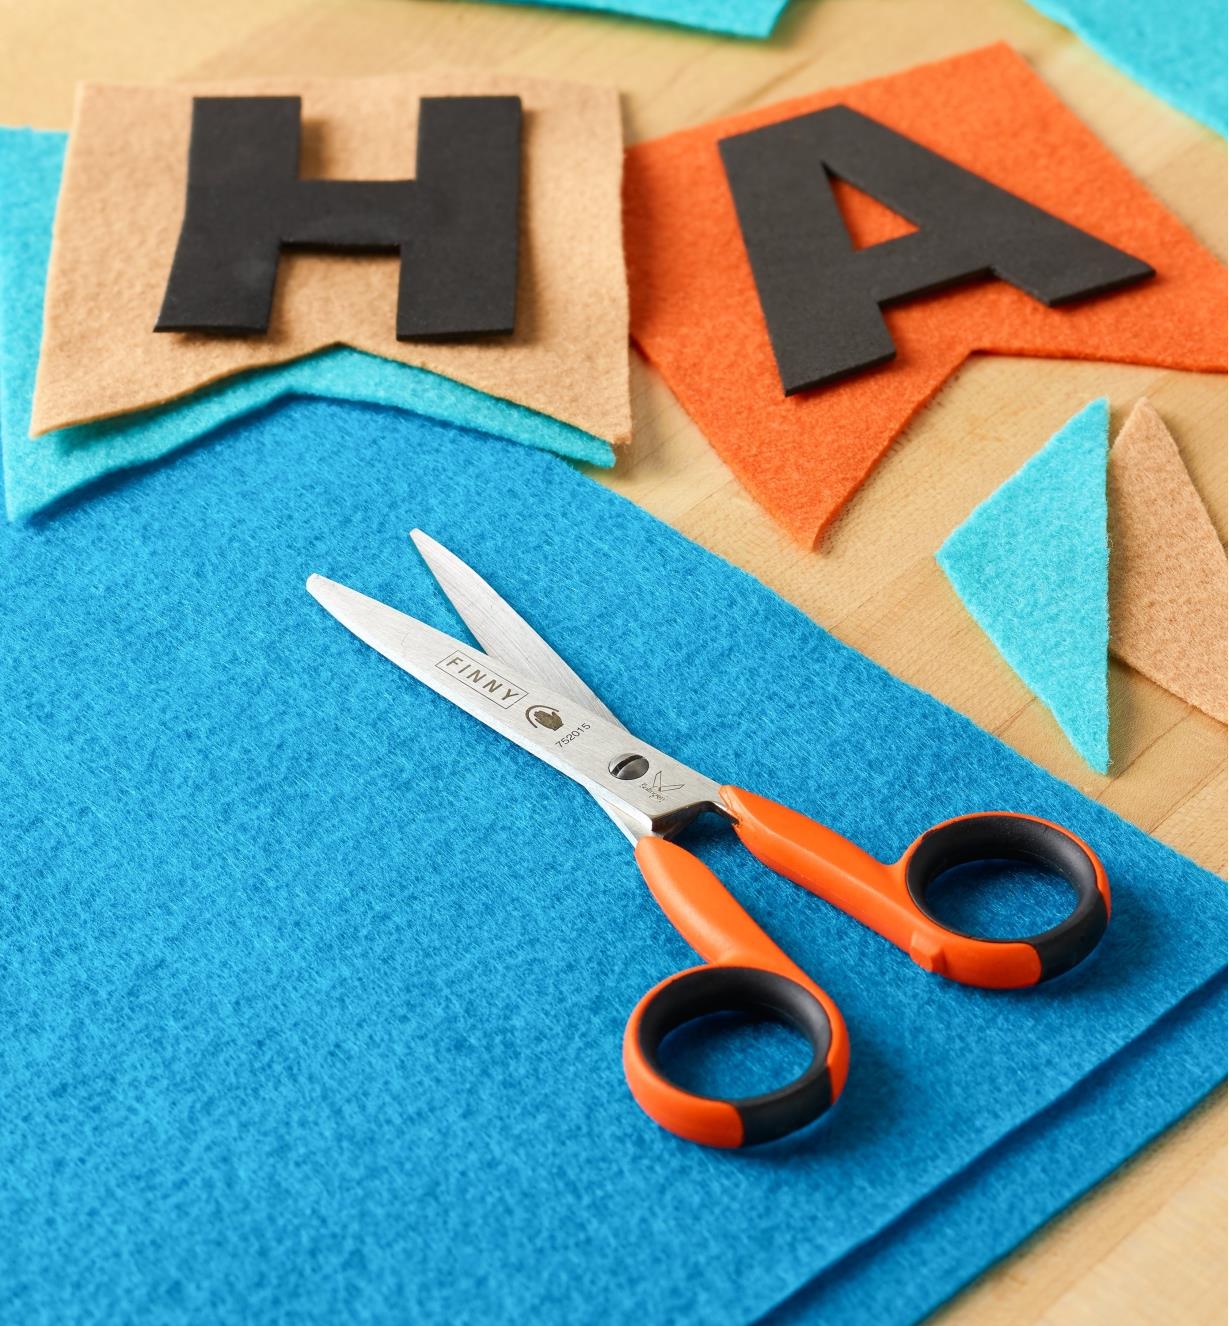 Precision Safety Scissors lying on a piece of felt next to cut-out felt letters